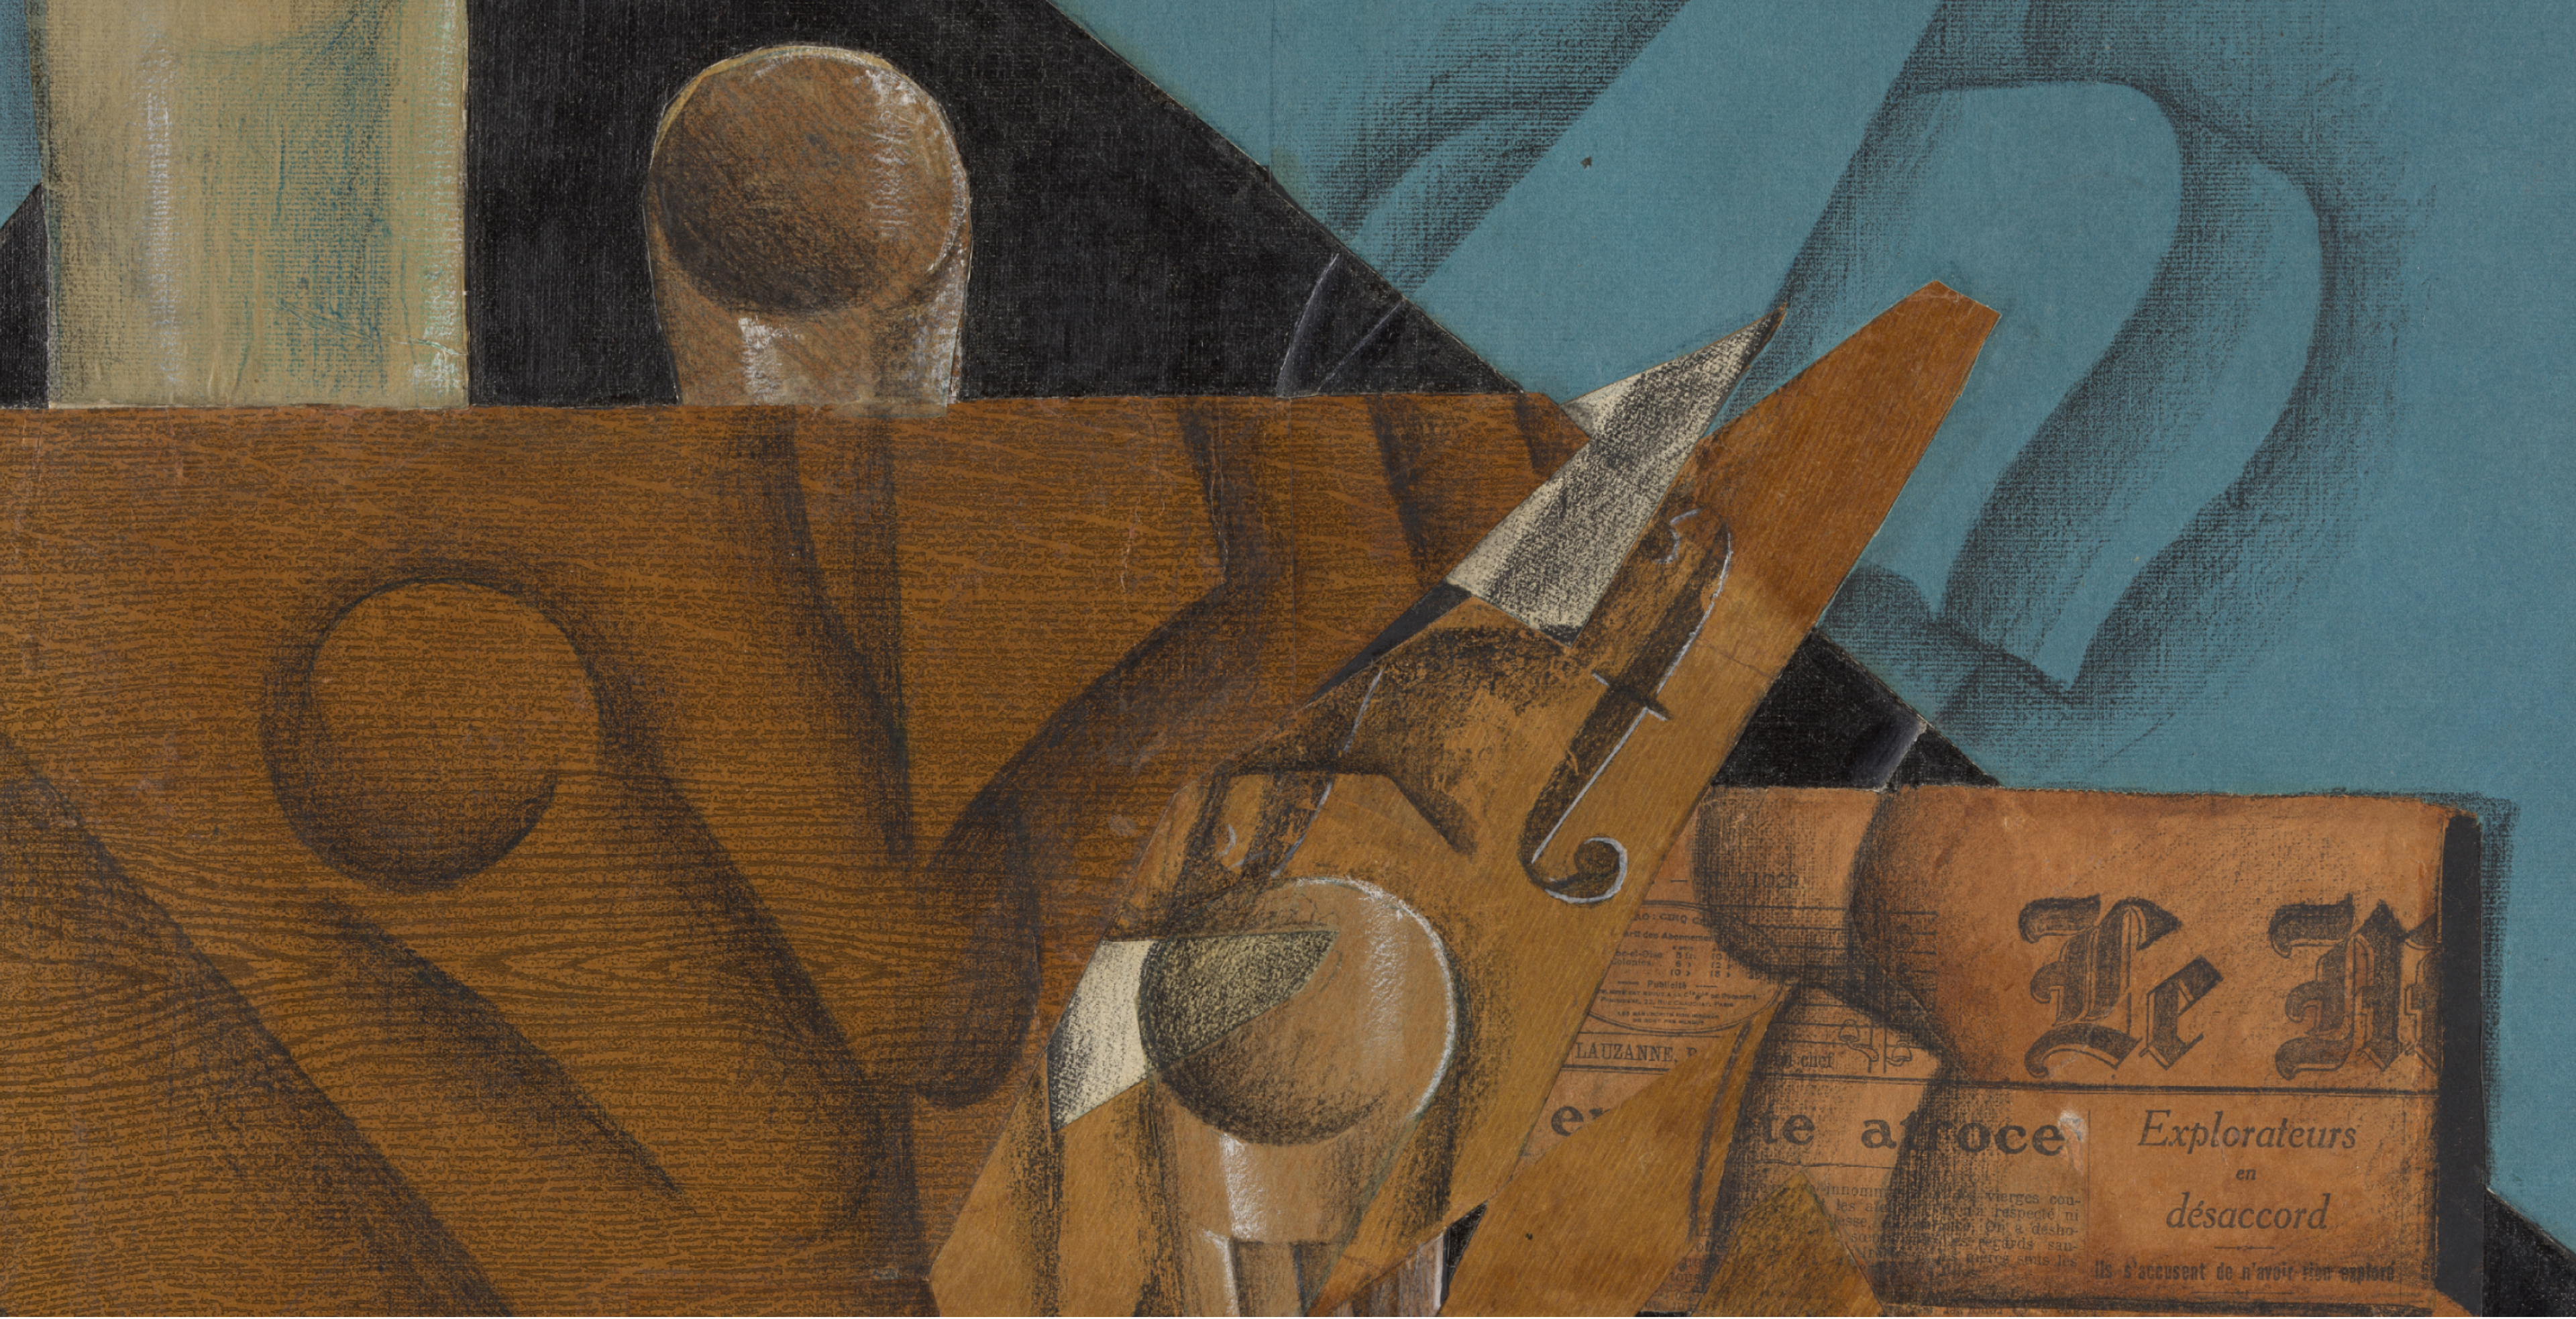 Cubist painting of a violin, sheet music, newspaper, wine bottle, and glasses in blue, black, tan, and white tones